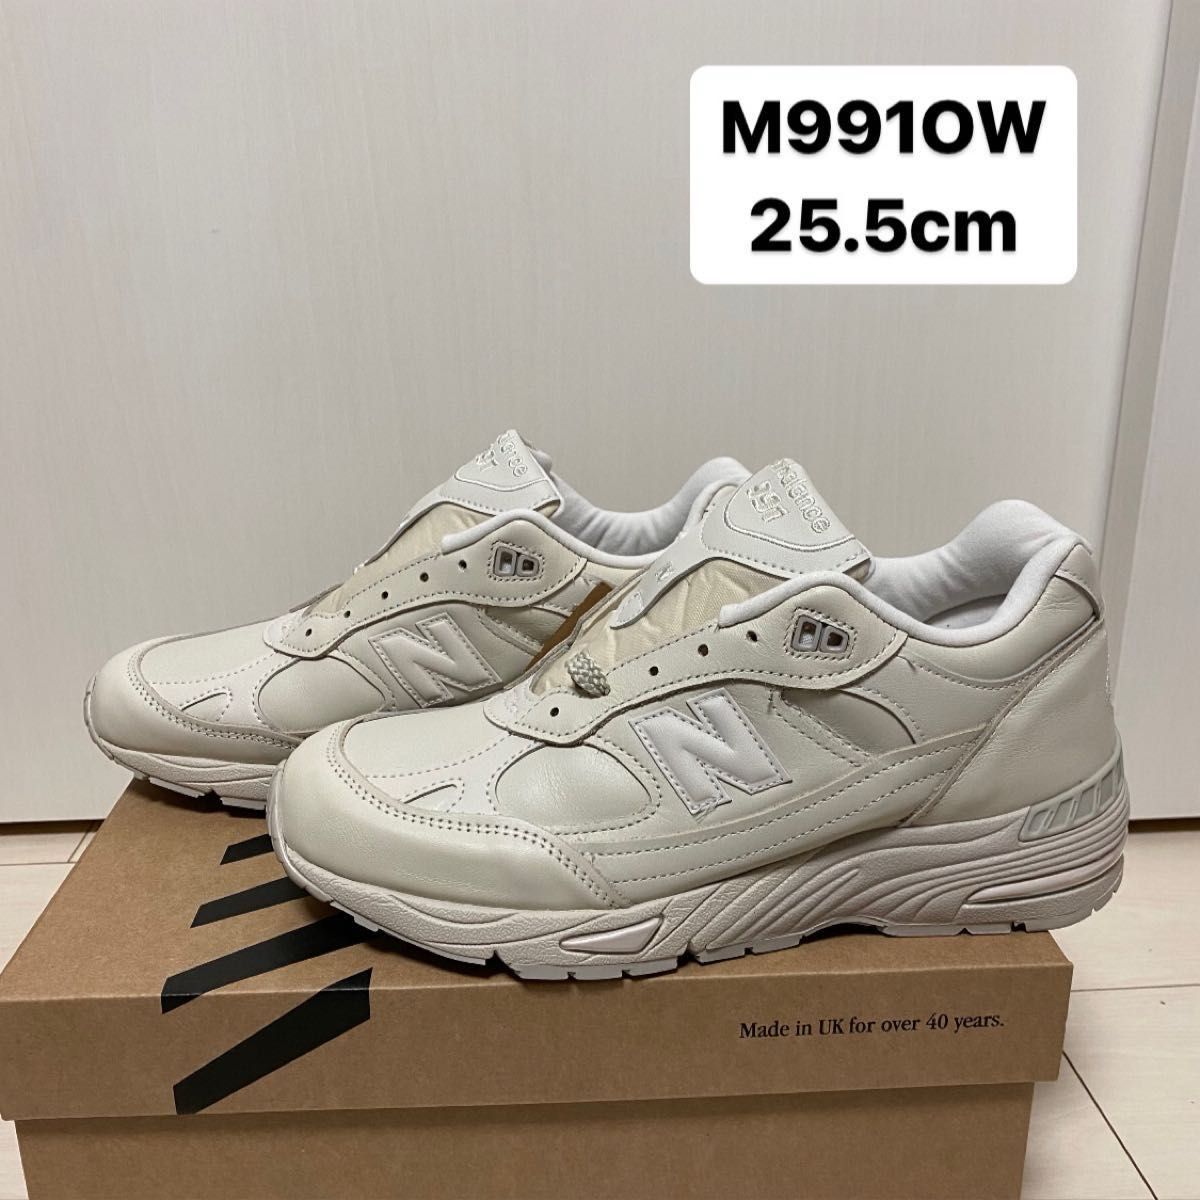 made in UK NEW BALANCE 991 M991OW 25.5cm